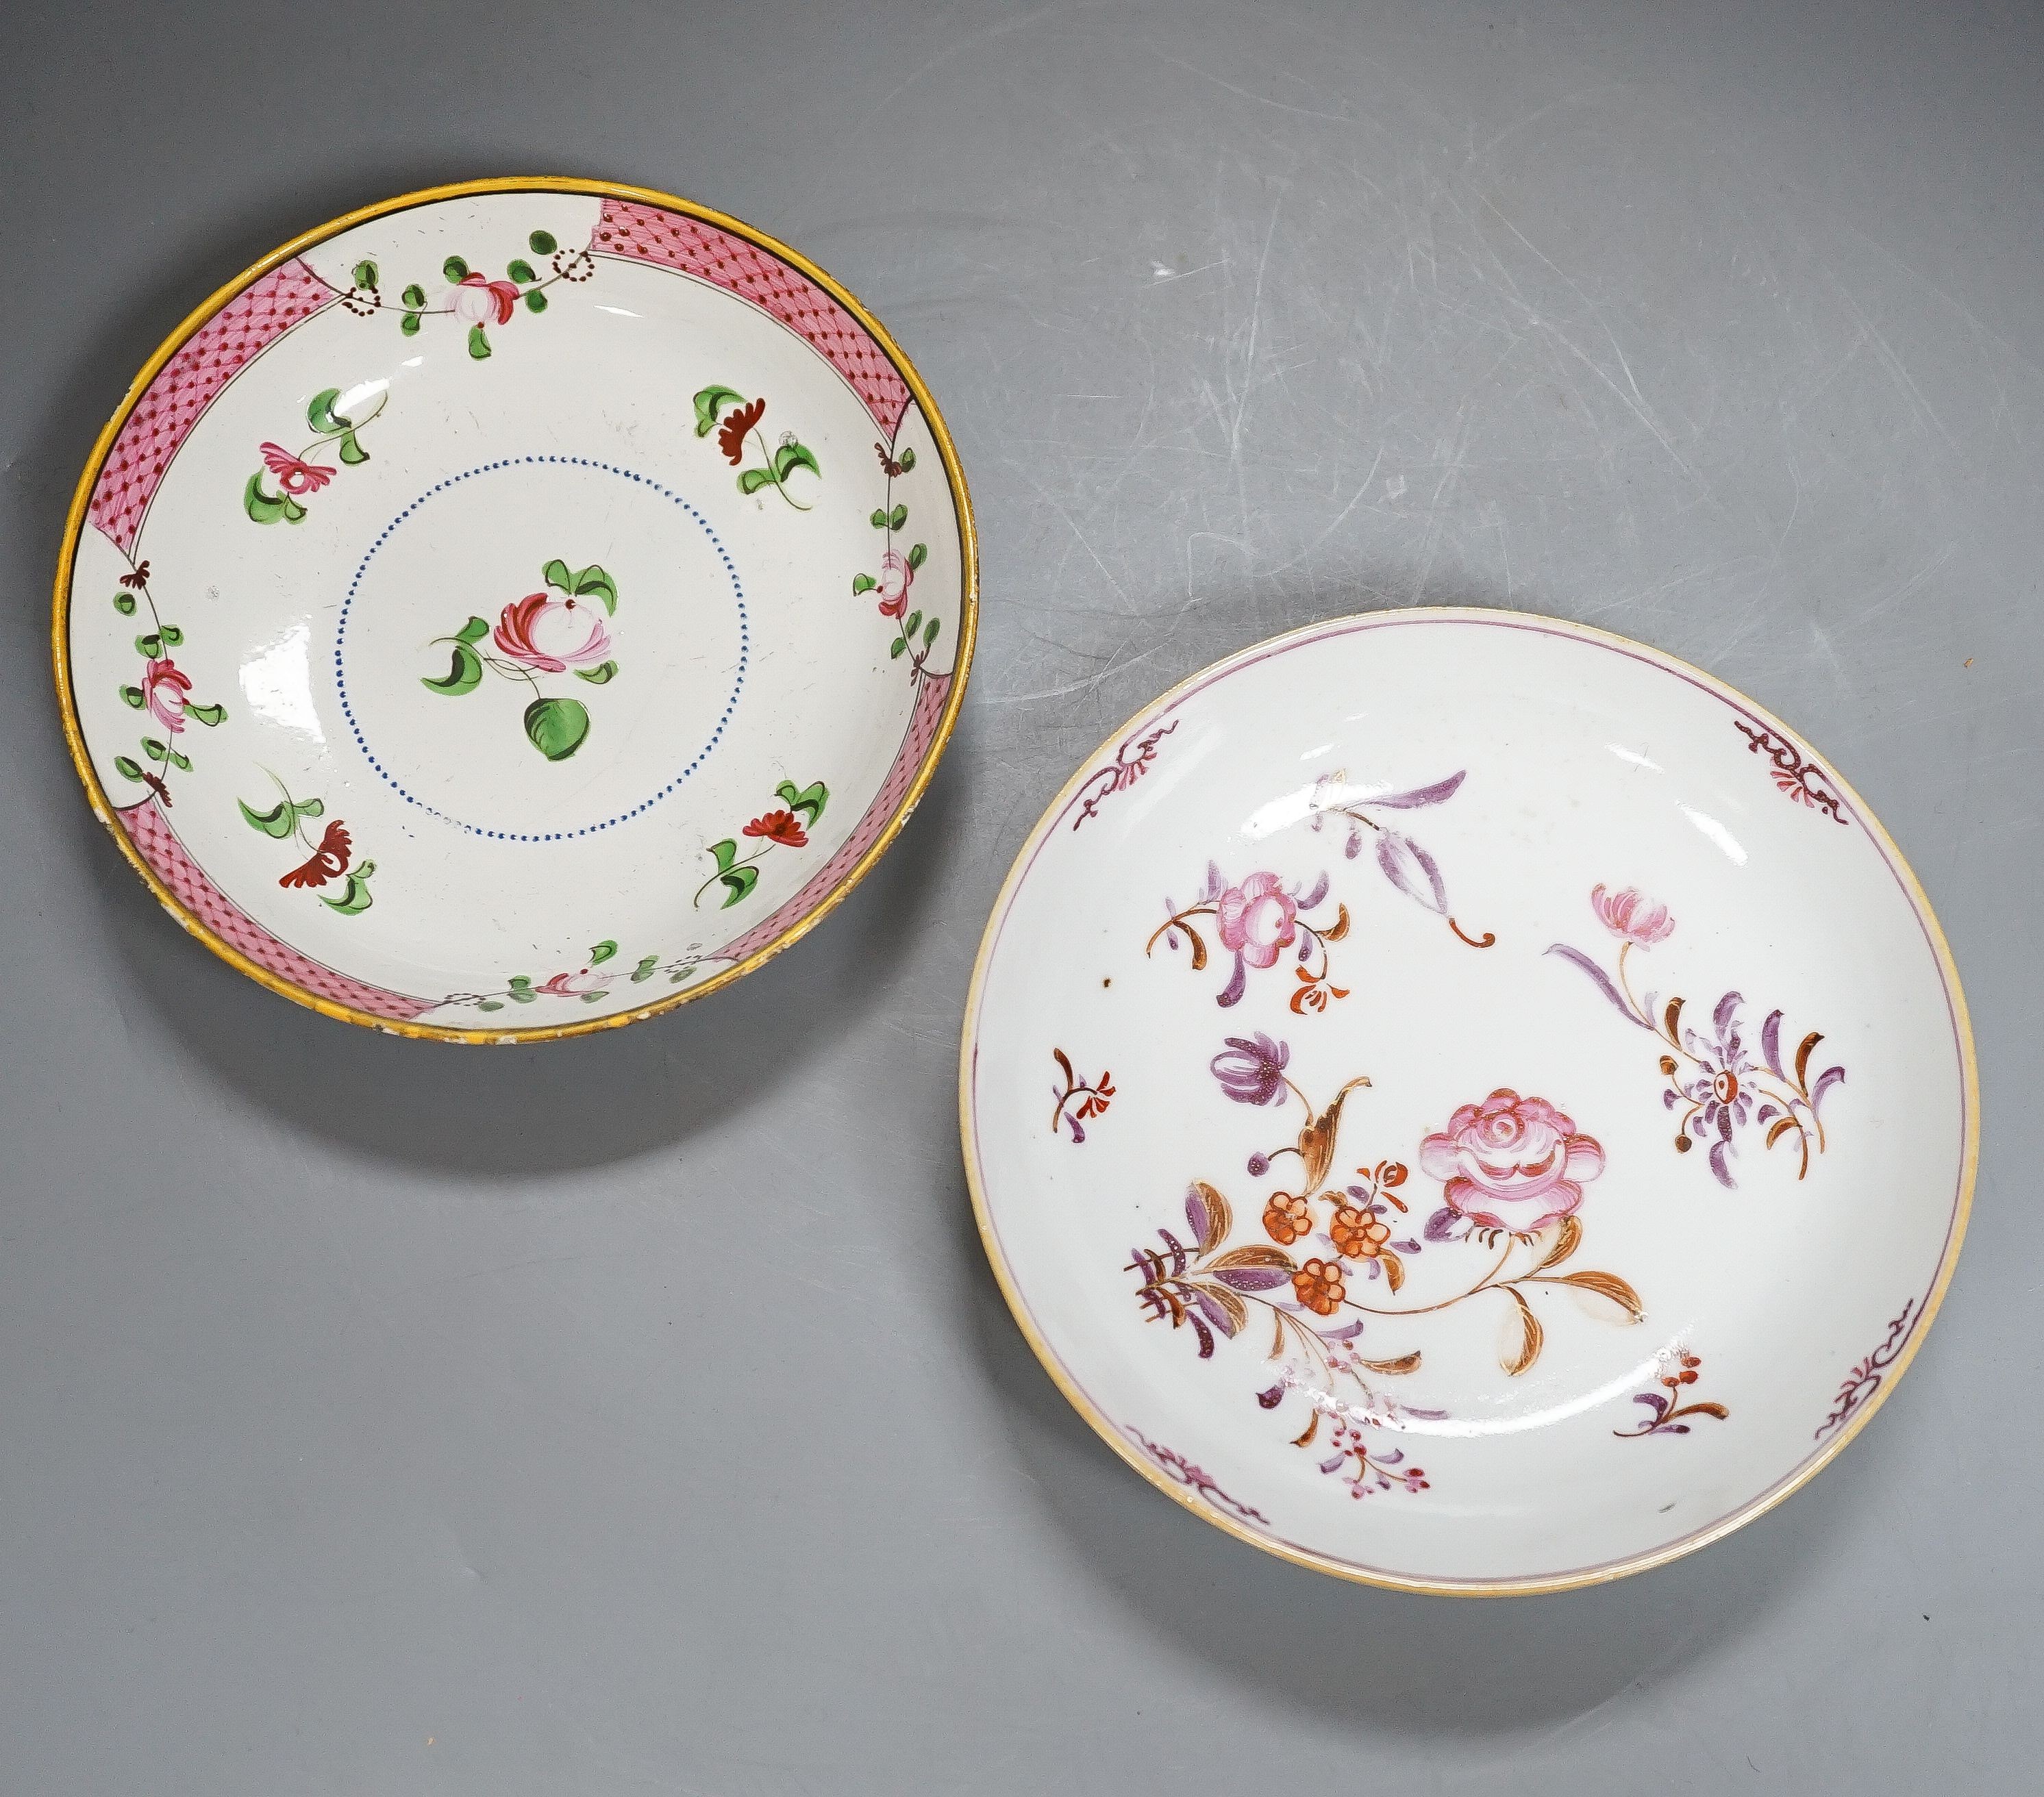 A late 18th century Chinese saucer and pearlware example (2)